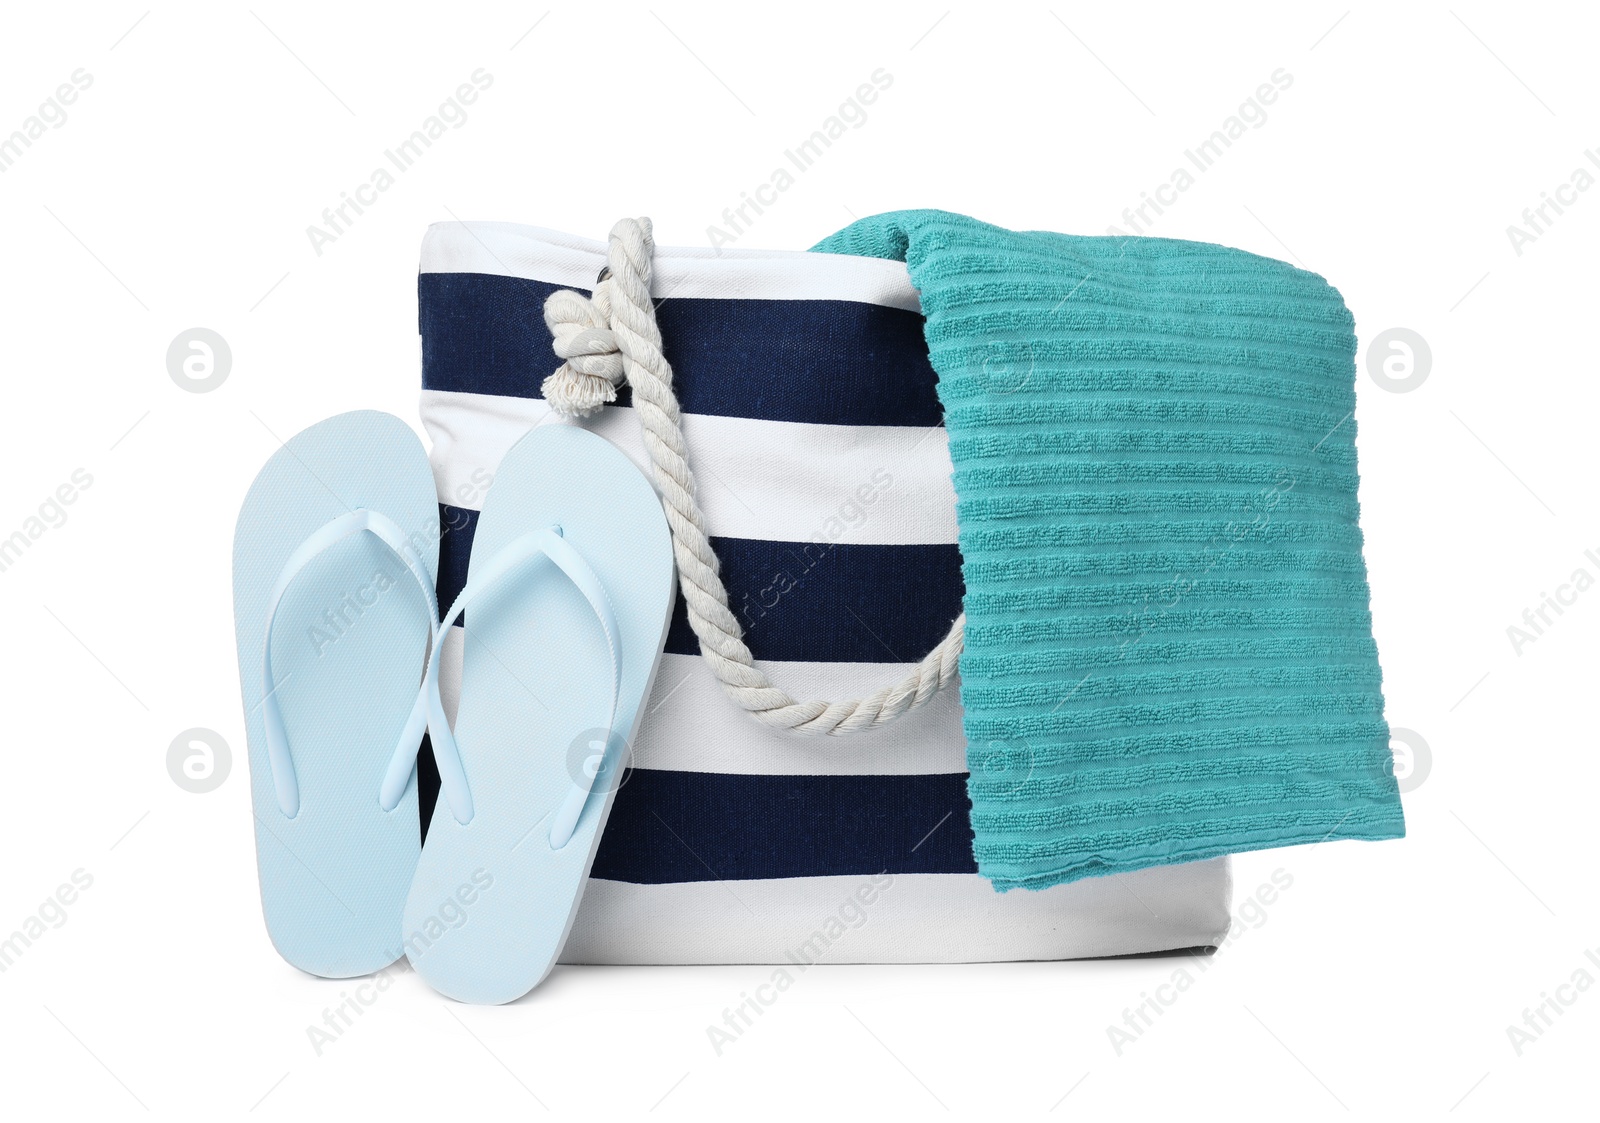 Photo of Stylish bag with beach accessories isolated on white